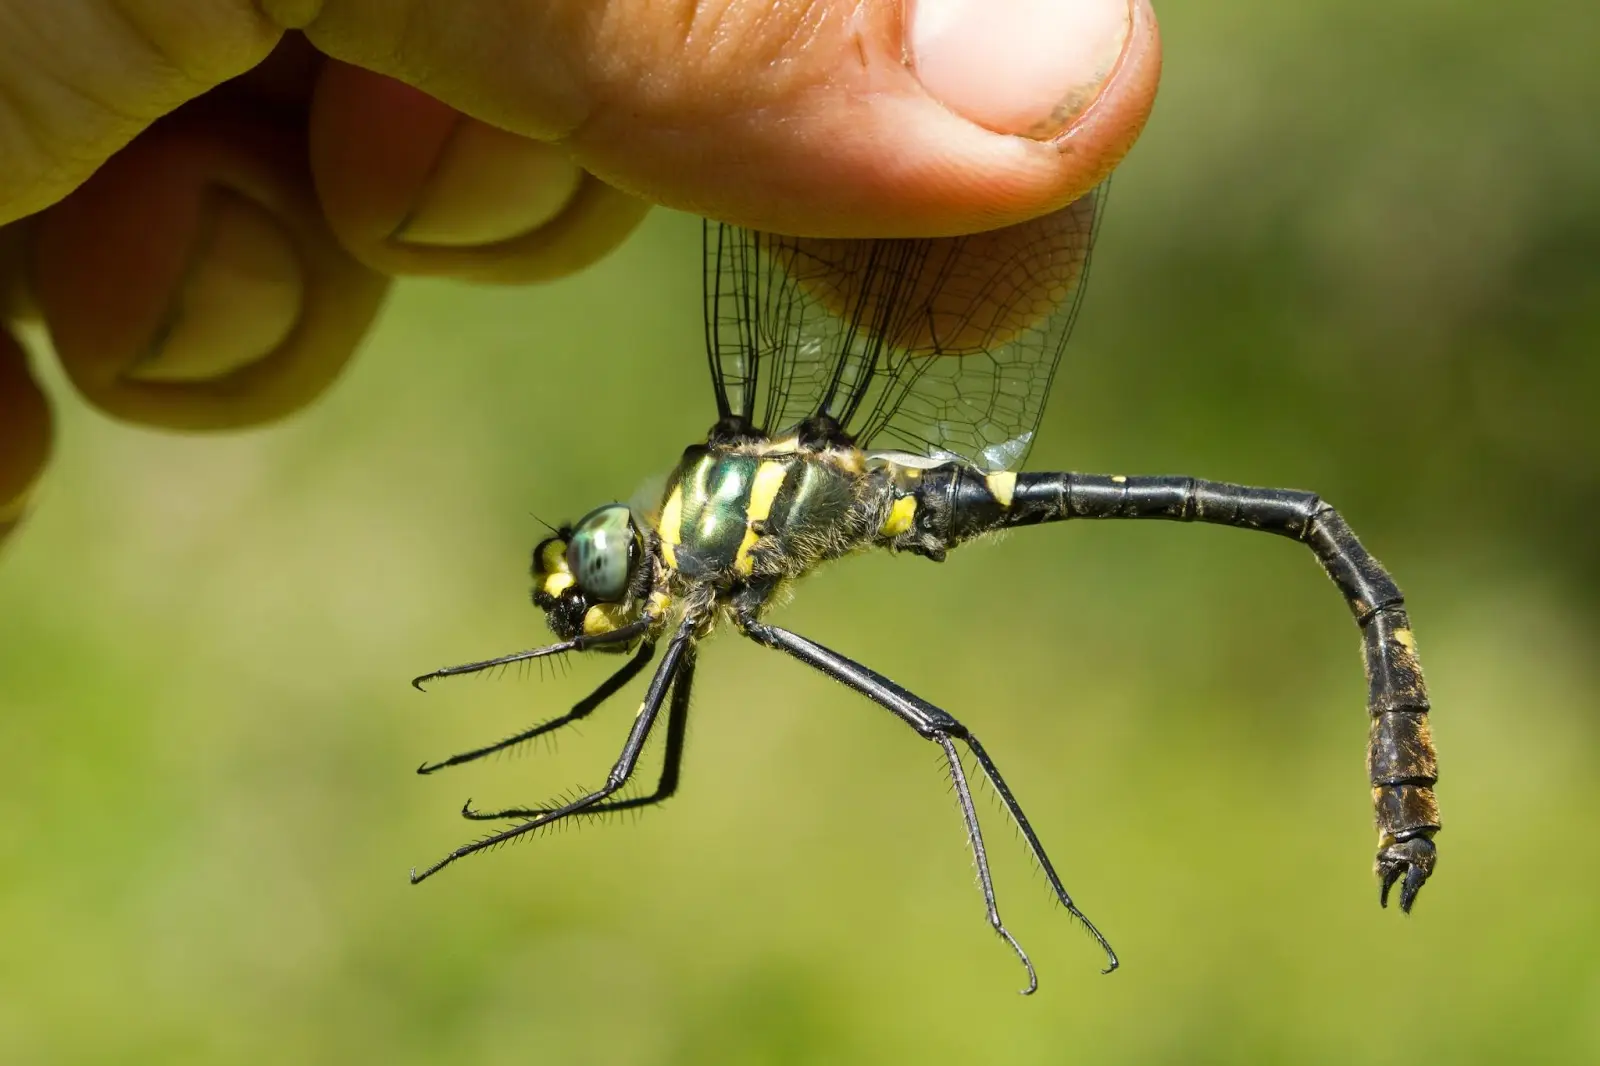 person holding mosquito by wings